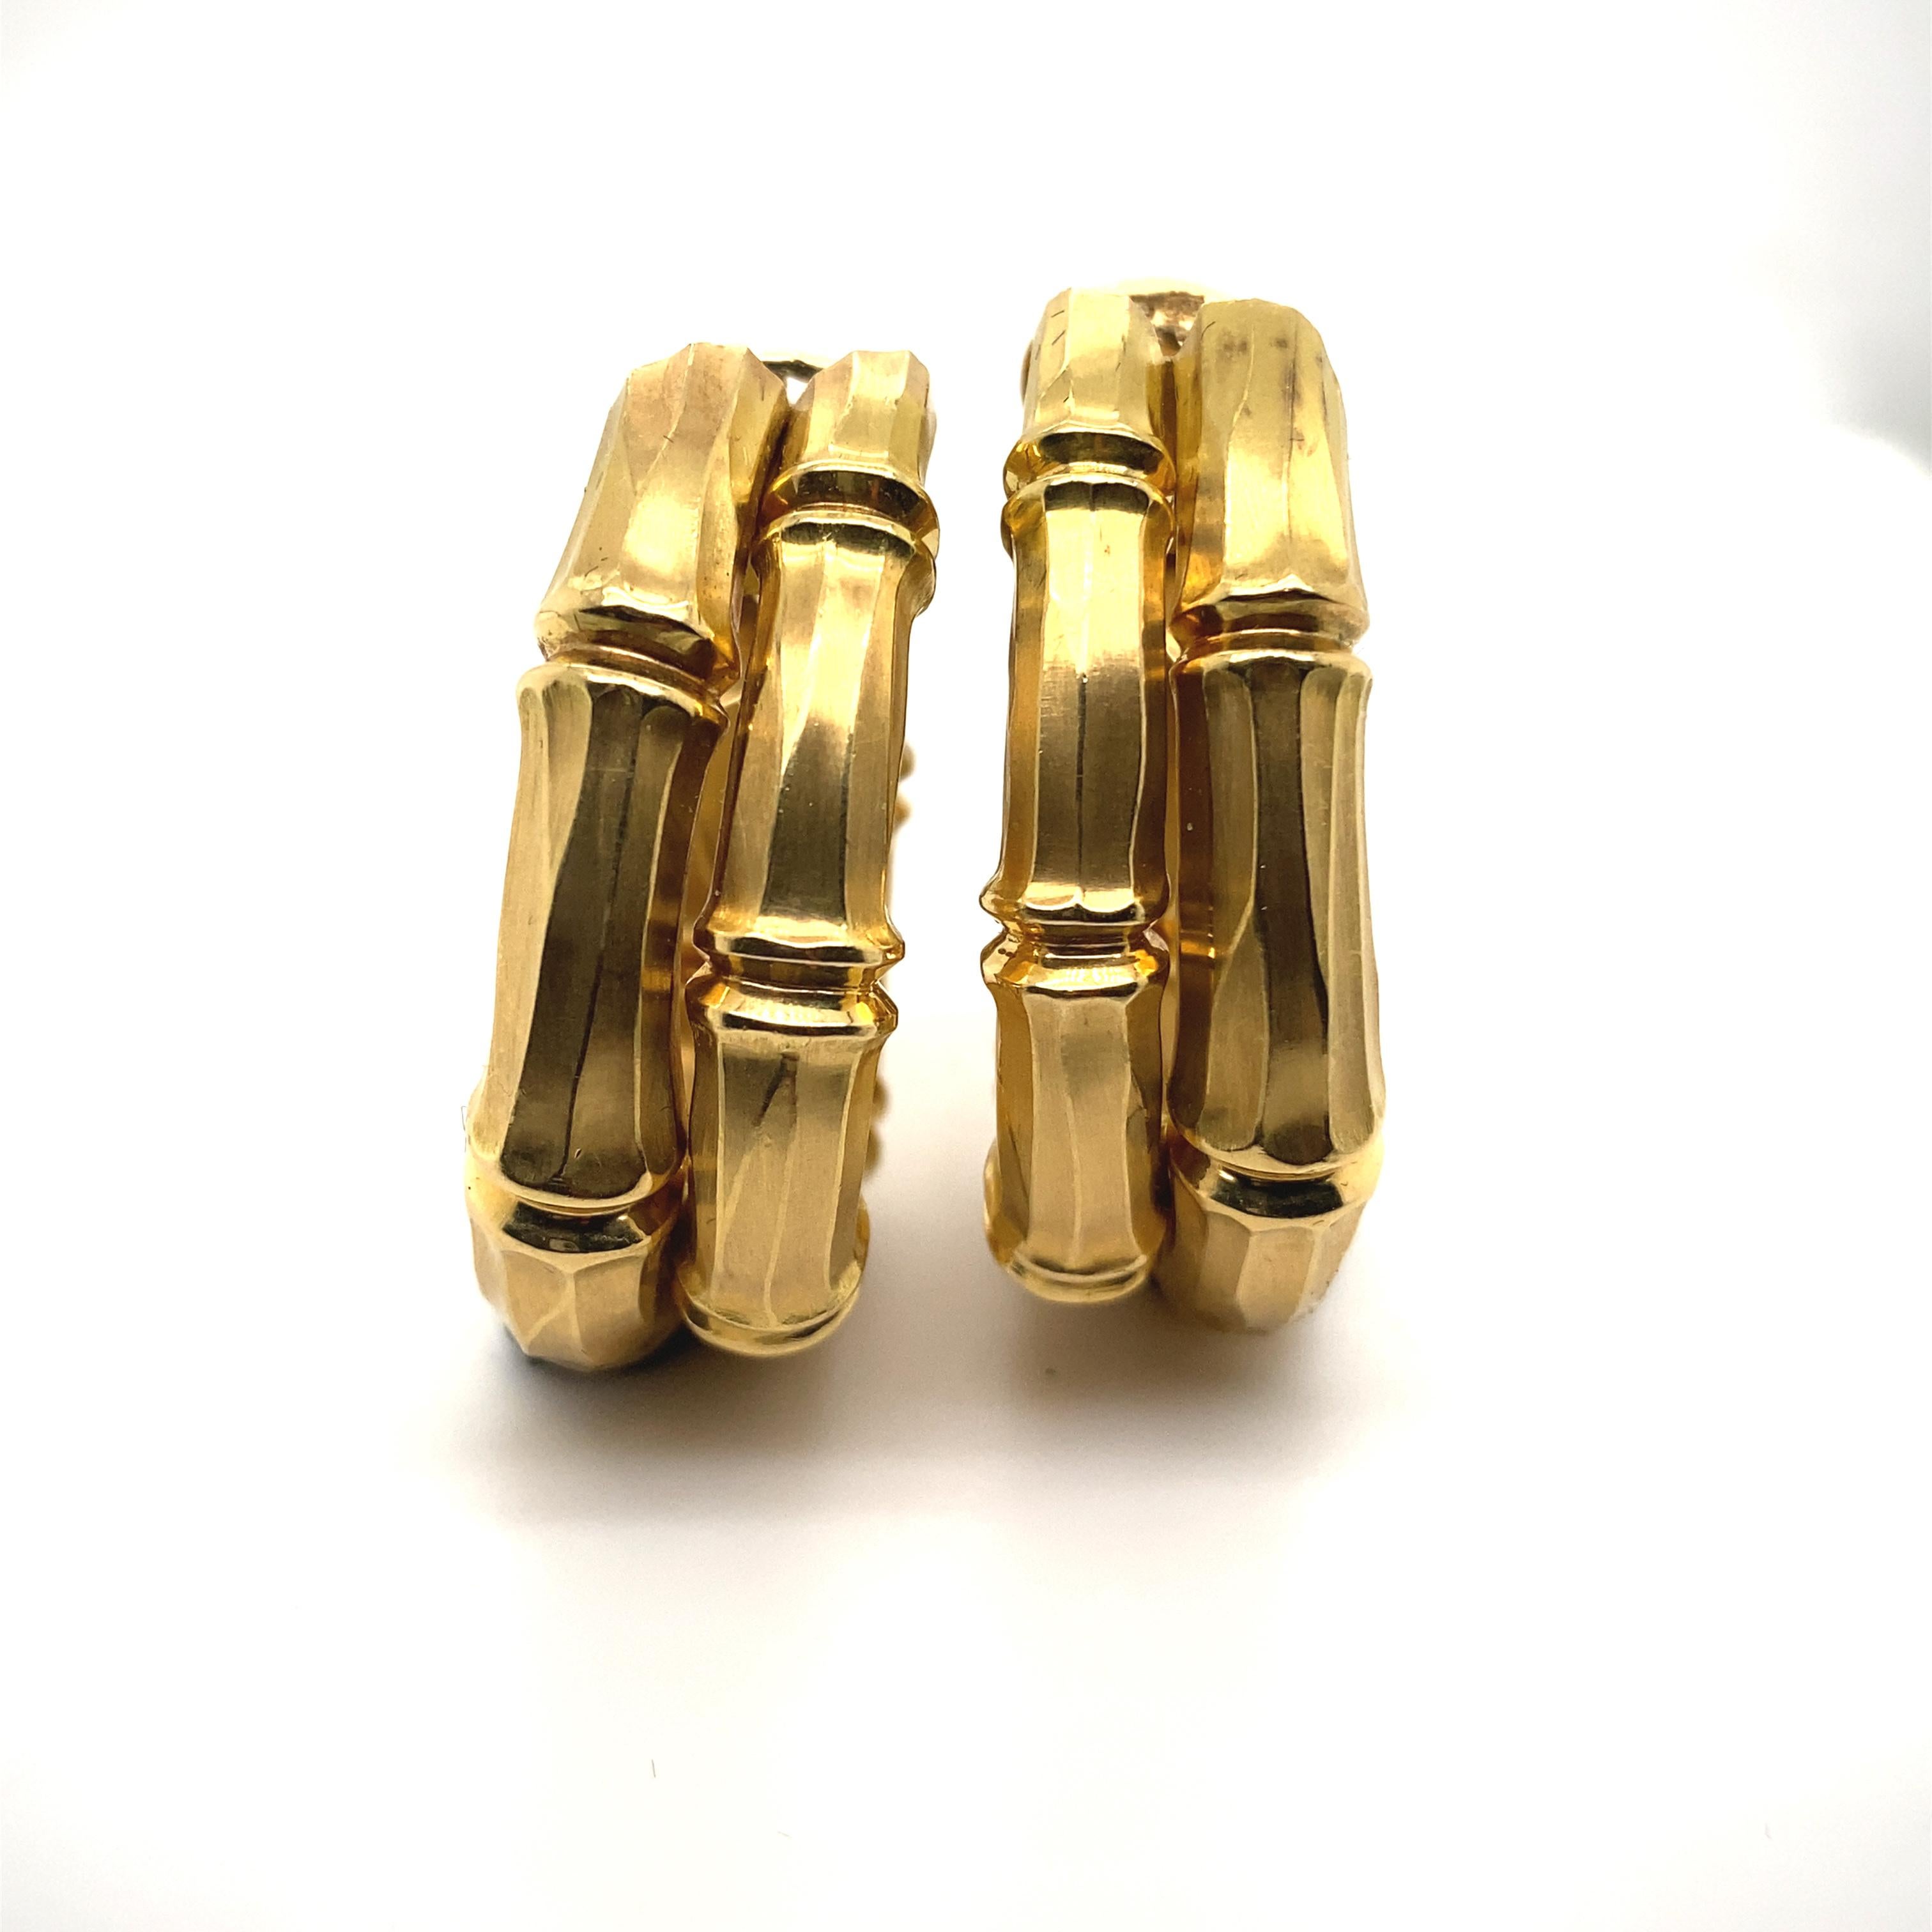 A vintage pair of Cartier Bamboo 18 karat yellow gold hoop earrings, circa 1990.

This bold pair of earrings were first designed by Cartier in the 1970's, the 'Bamboo' collection radiates with chic, easy going style.

Each earring depicting a double